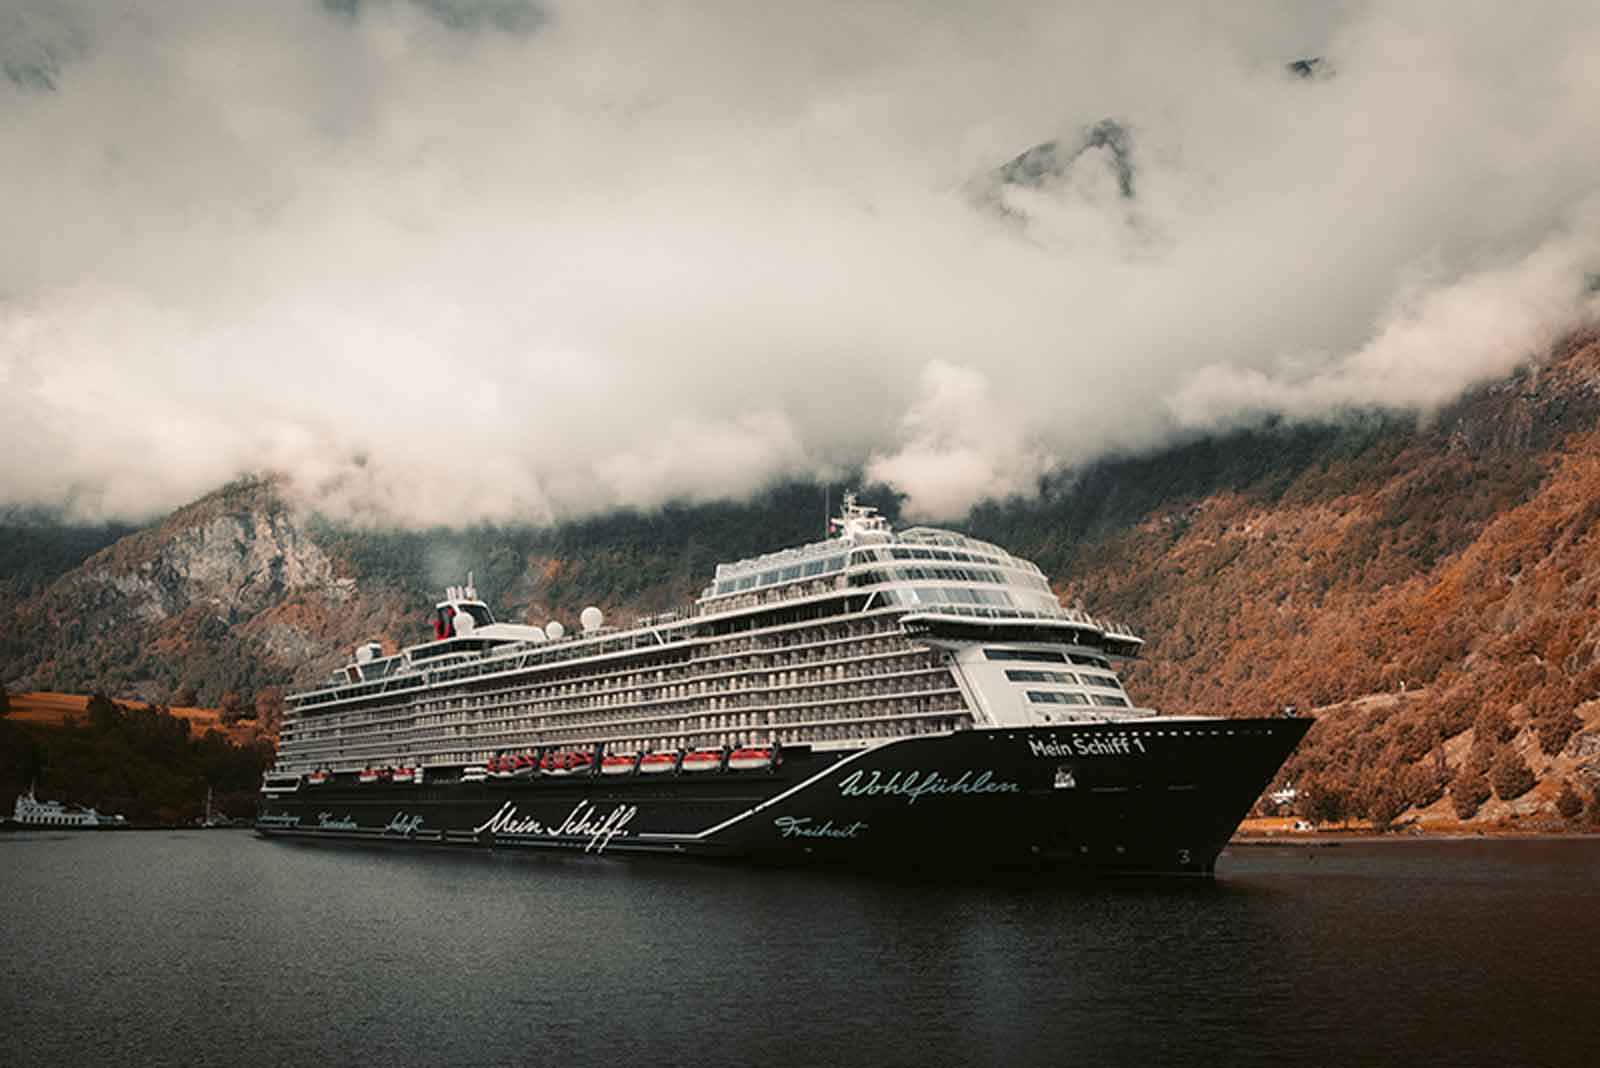 Cruise ship under heavy clouds